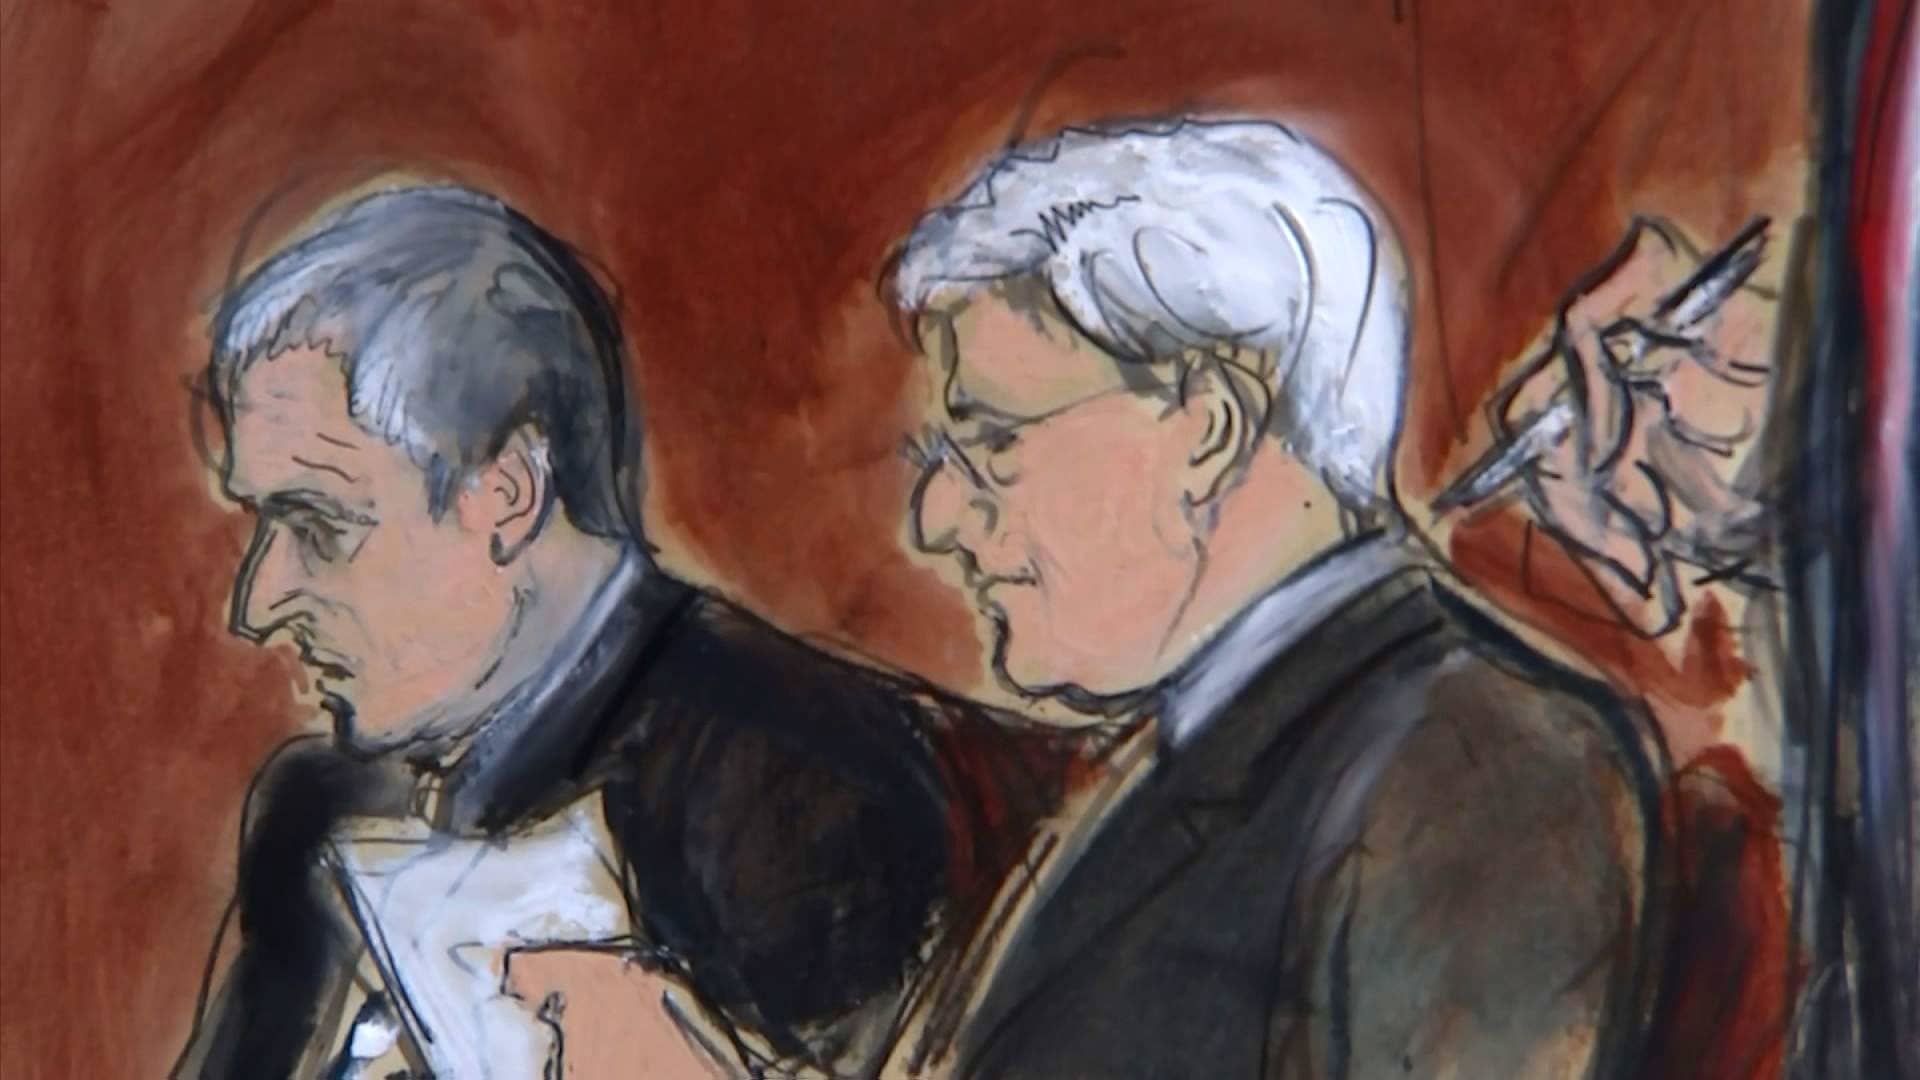 Courtroom sketch of James Patten, left, and attorney Ira Sorkin at N.J. District Court in Camden, N.J., Oct. 11, 2022